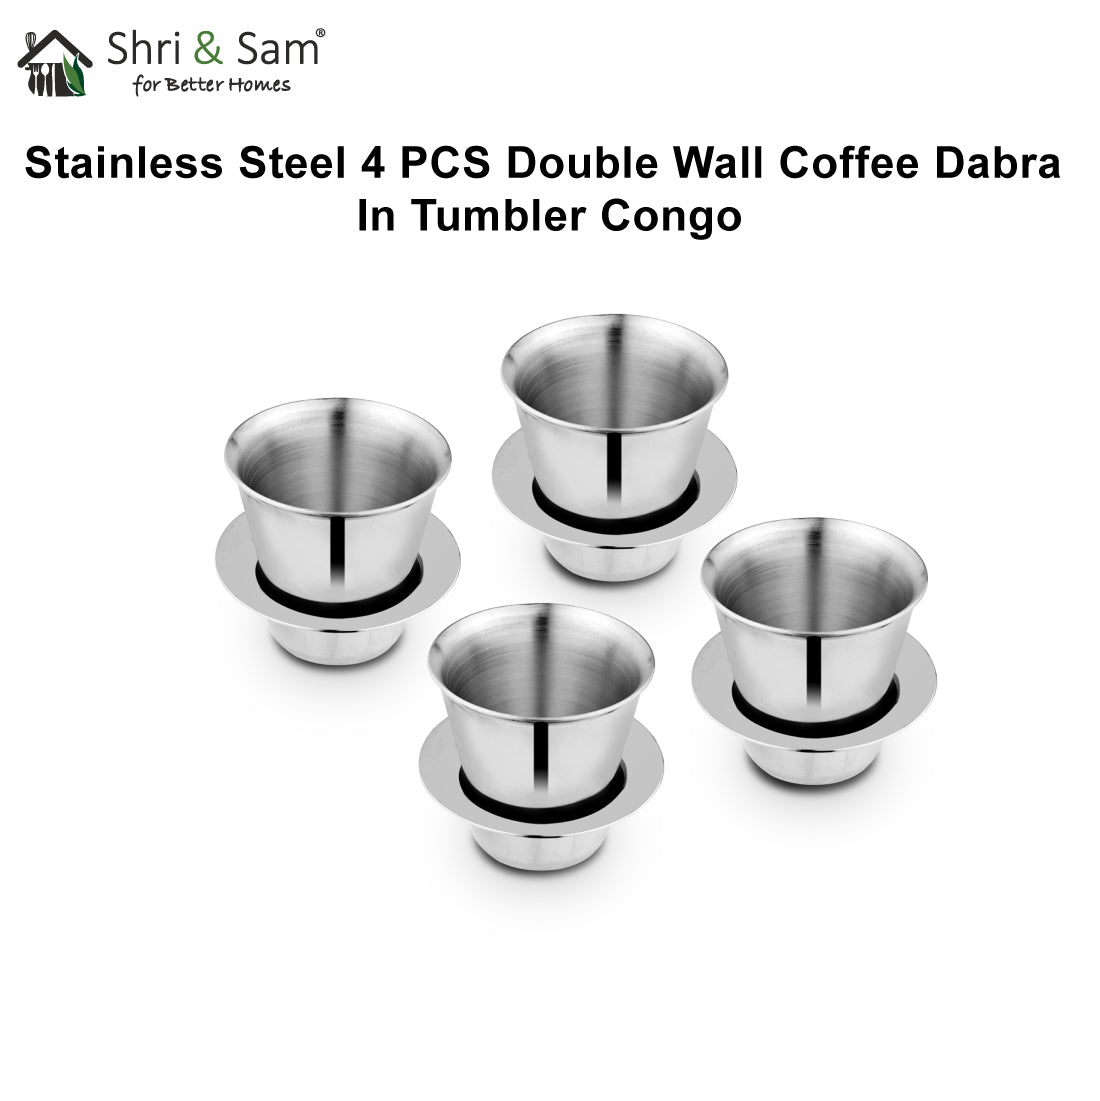 Stainless Steel 4 PCS Double Wall Coffee Dabra In Tumbler Congo